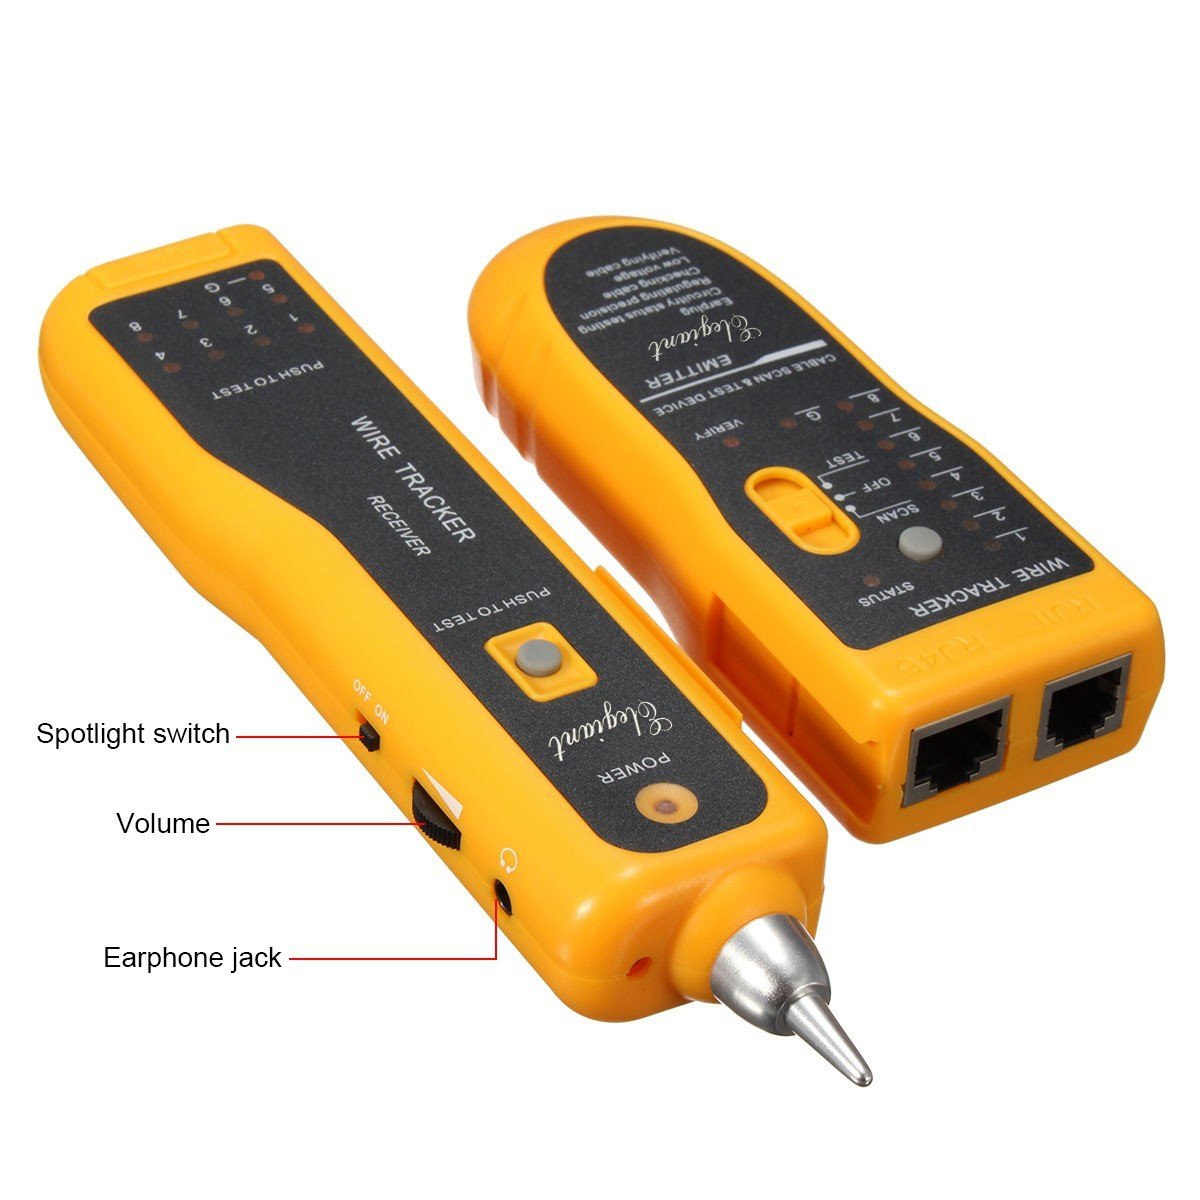 XQ350 Network Cable Tester